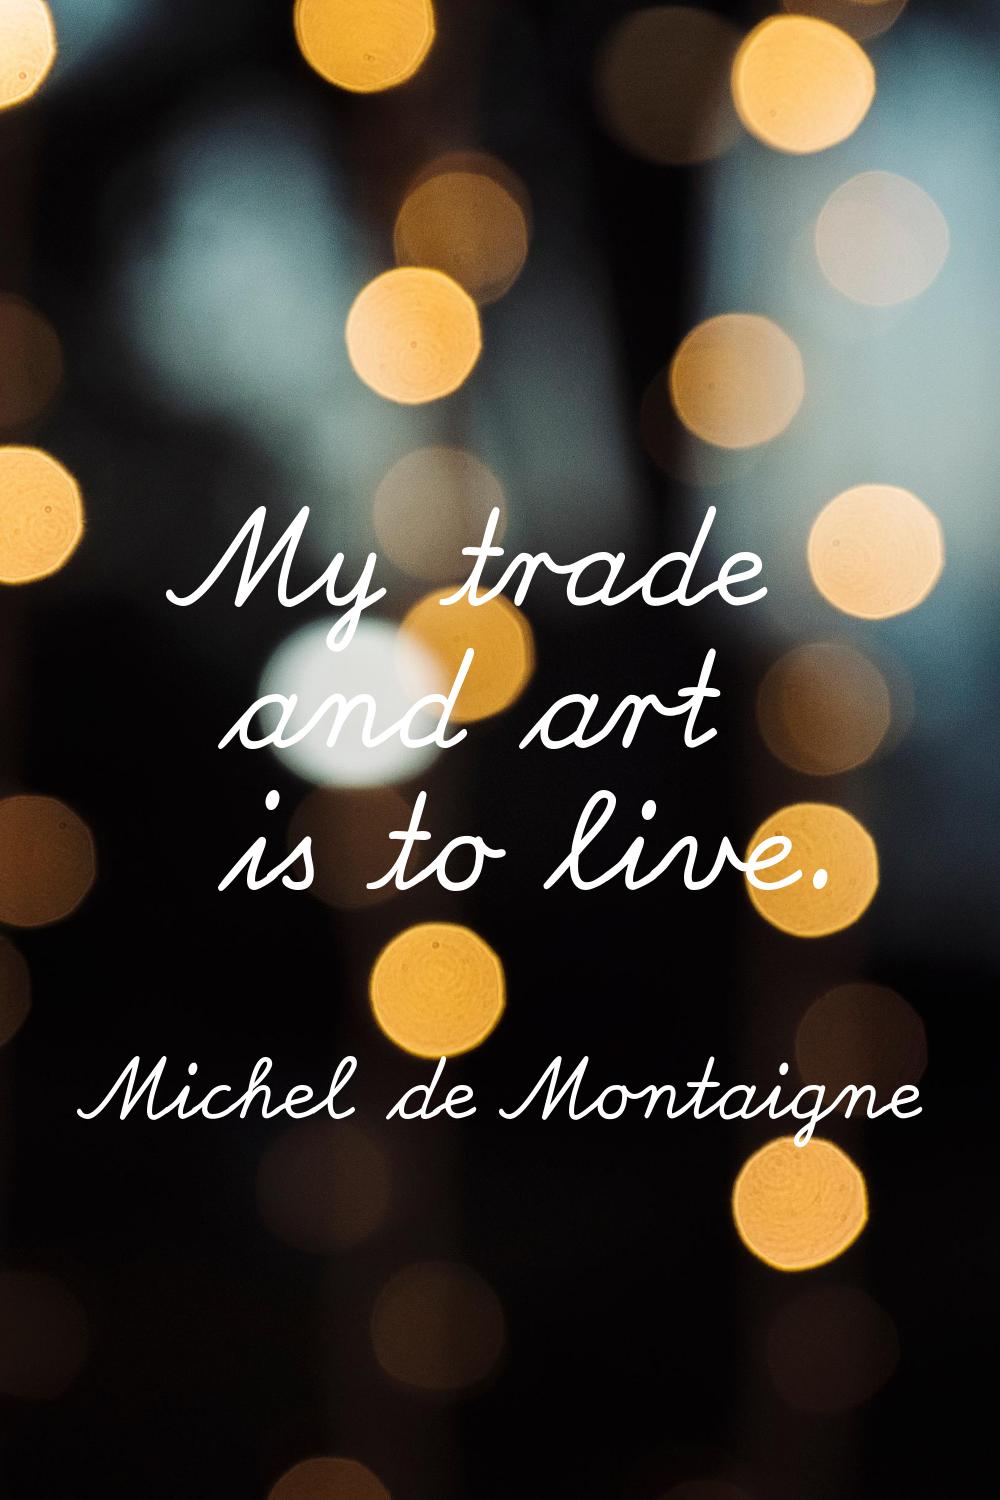 My trade and art is to live.